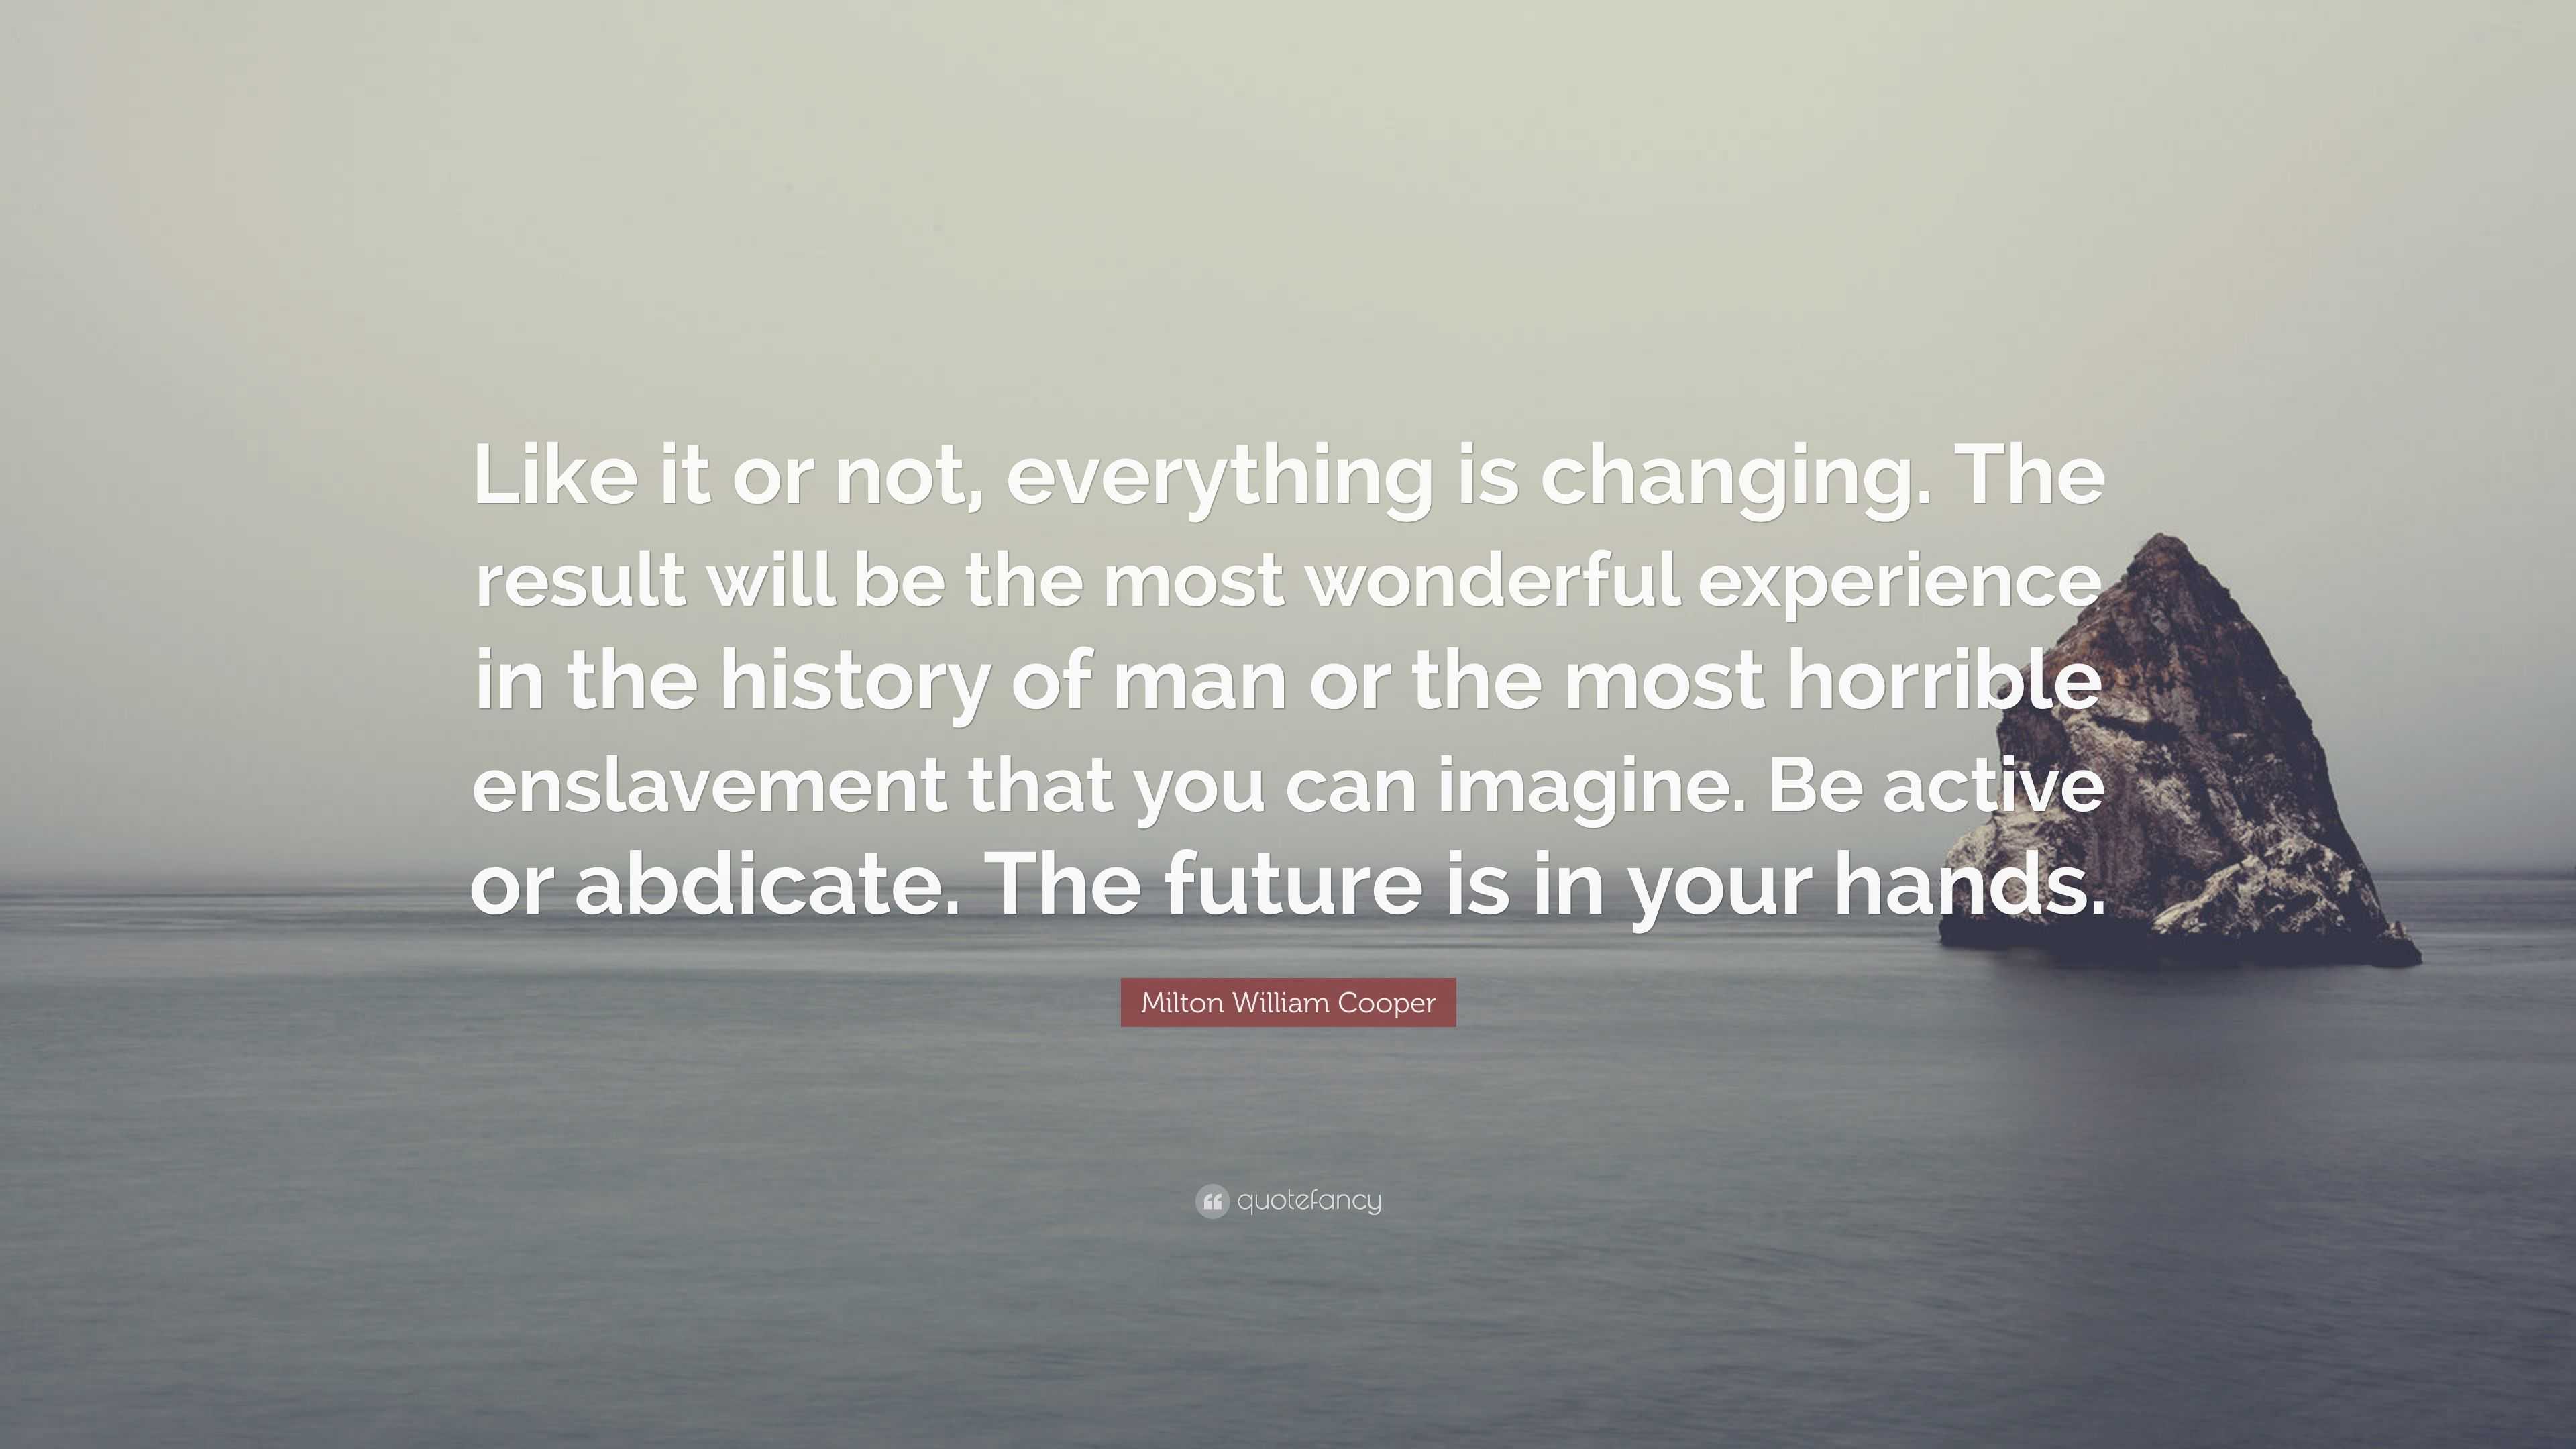 “Like it or not, everything is changing. The result will be the most wonderful experience in the history of man or the most horrible enslavement that you can imagine. Be active or abdicate. The future is in your hands.”